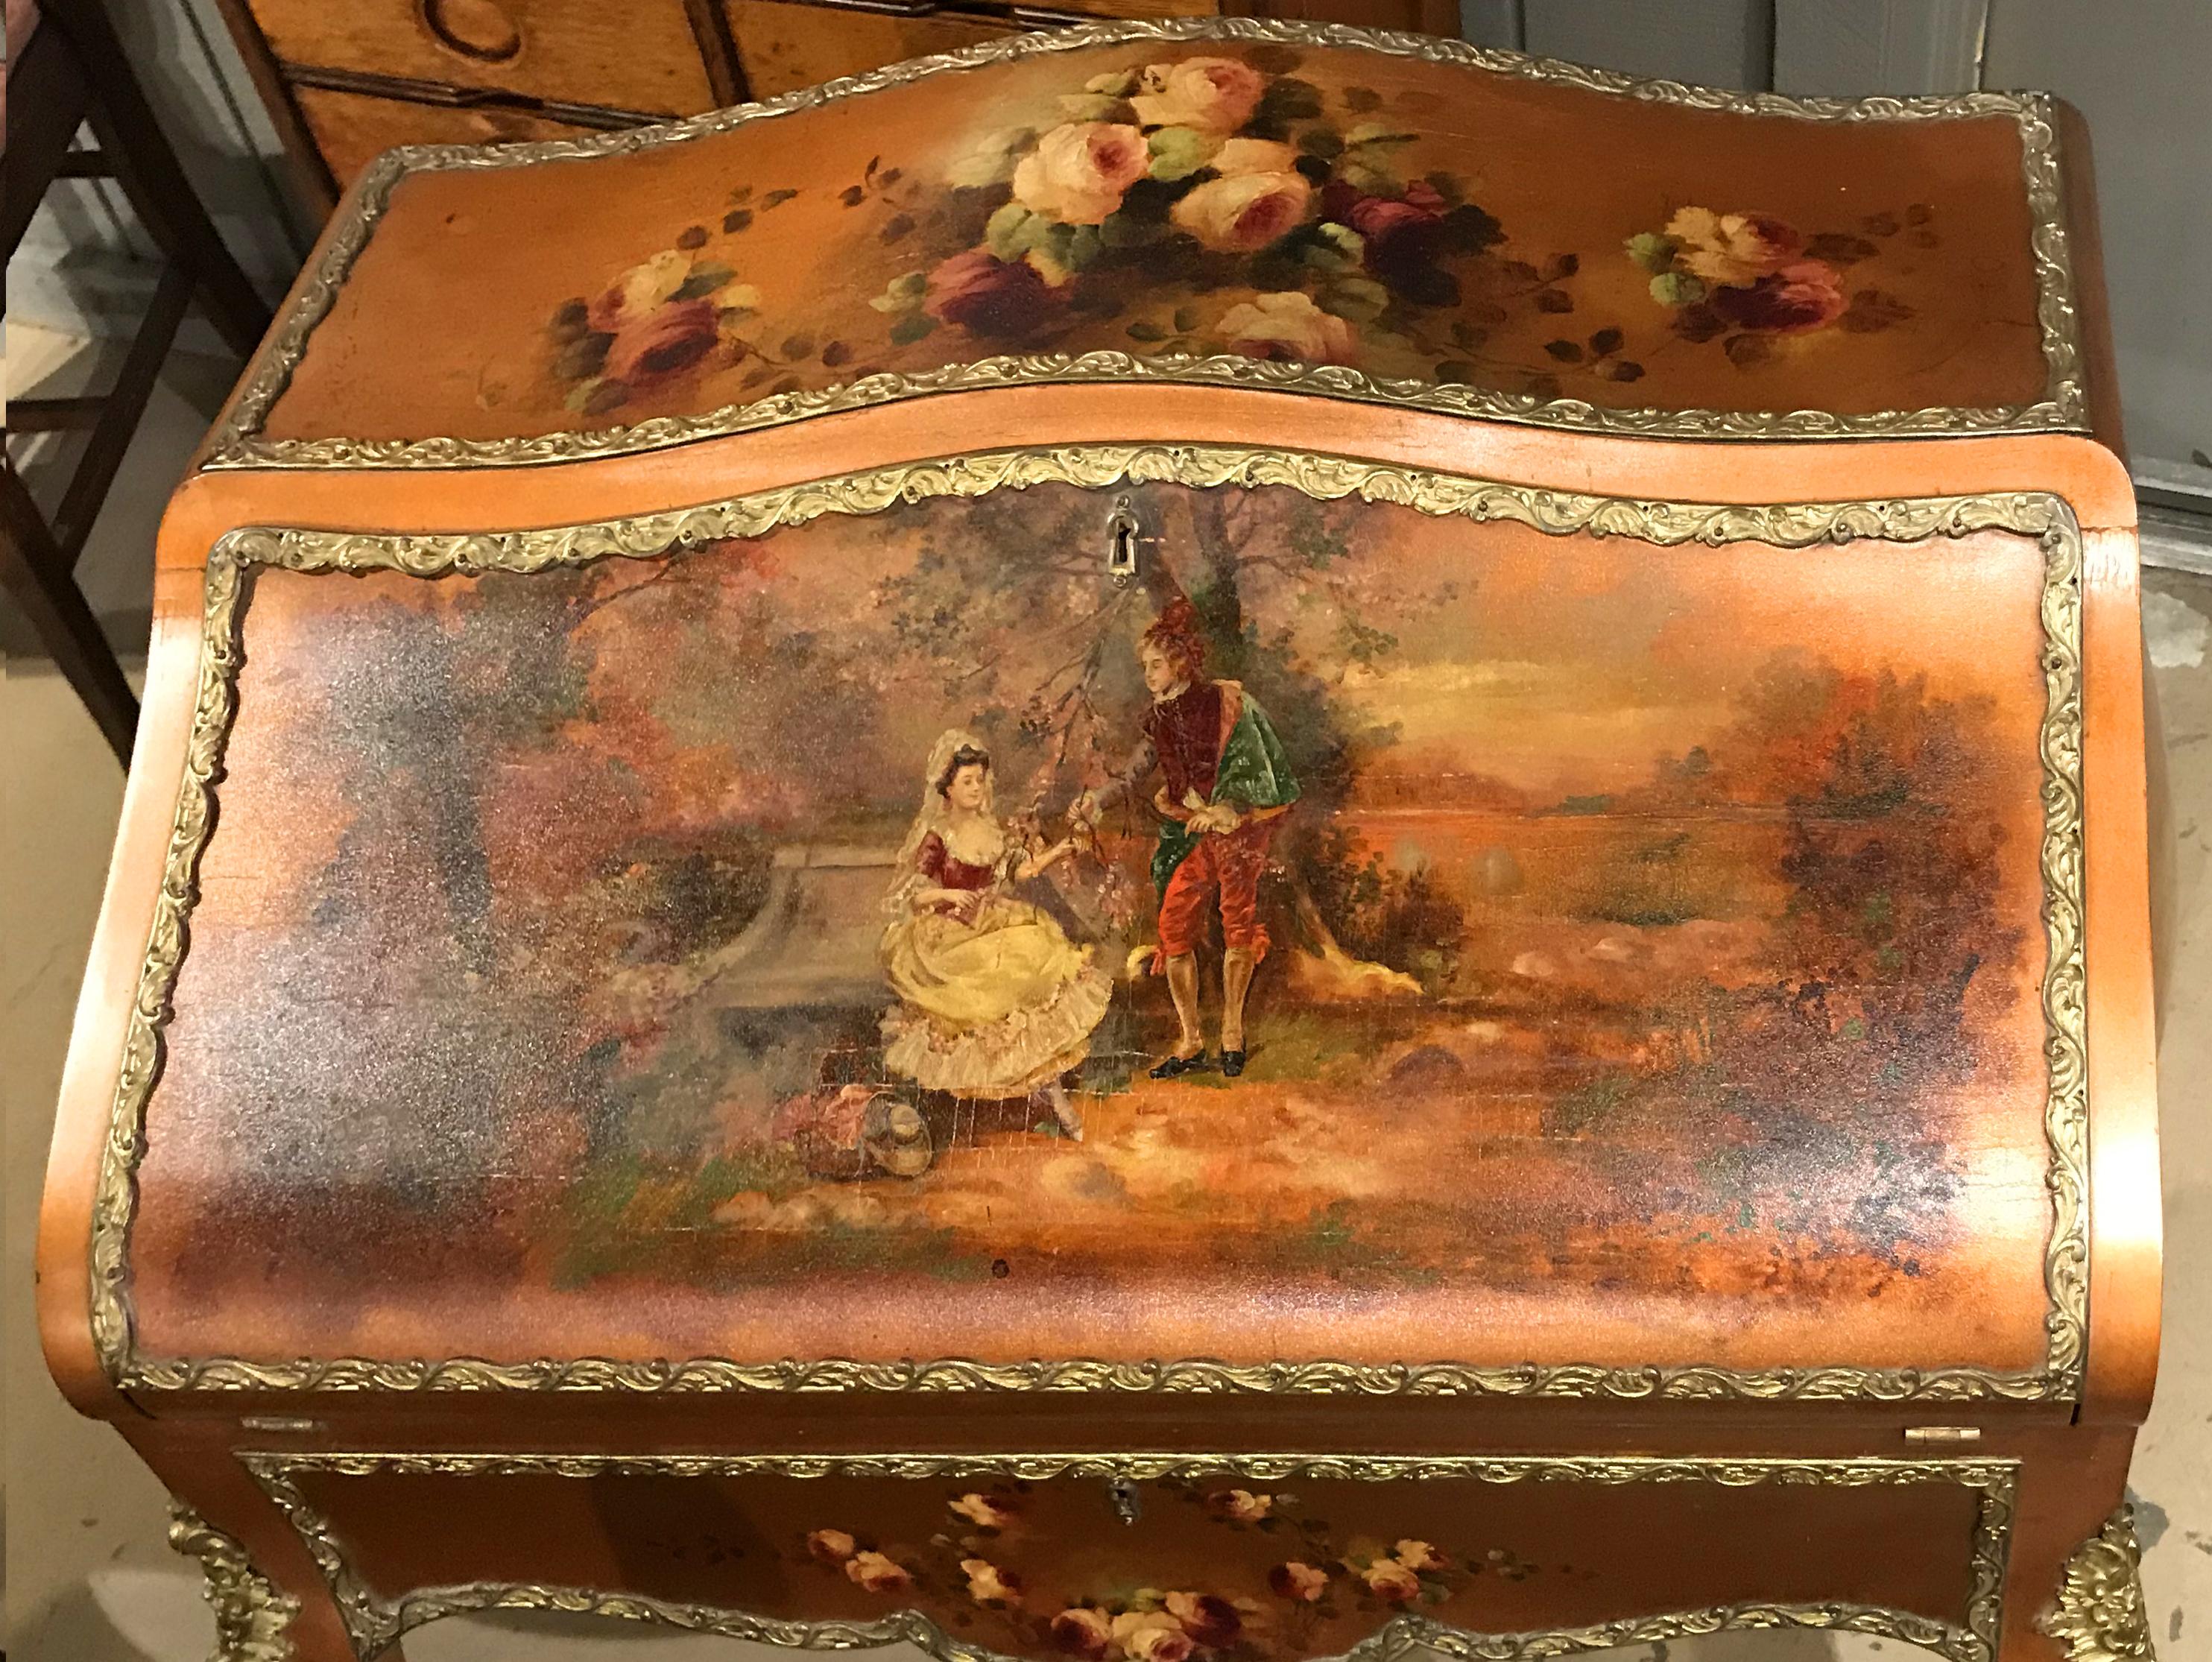 A wonderful Louis XVI style ladies slant front writing desk with hand painted genre and country landscape scenes on the lid and sides, as well as floral decoration painted on the top and lower drawer, opening to a compartmentalized interior and